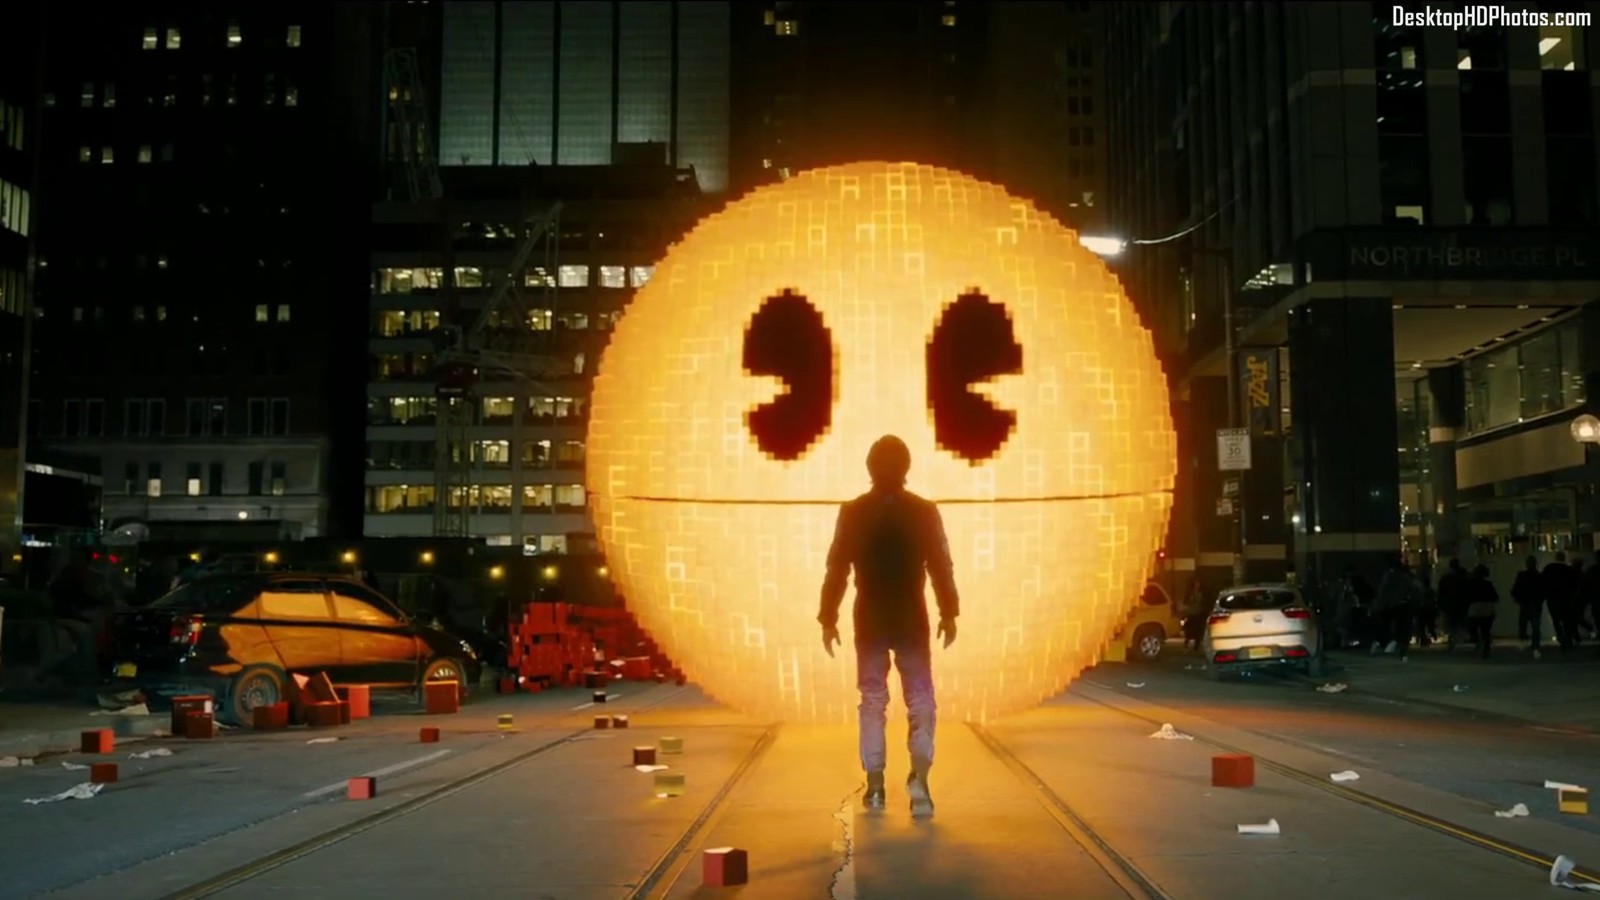 PIXELS Features A Script With Too Many Design Flaws